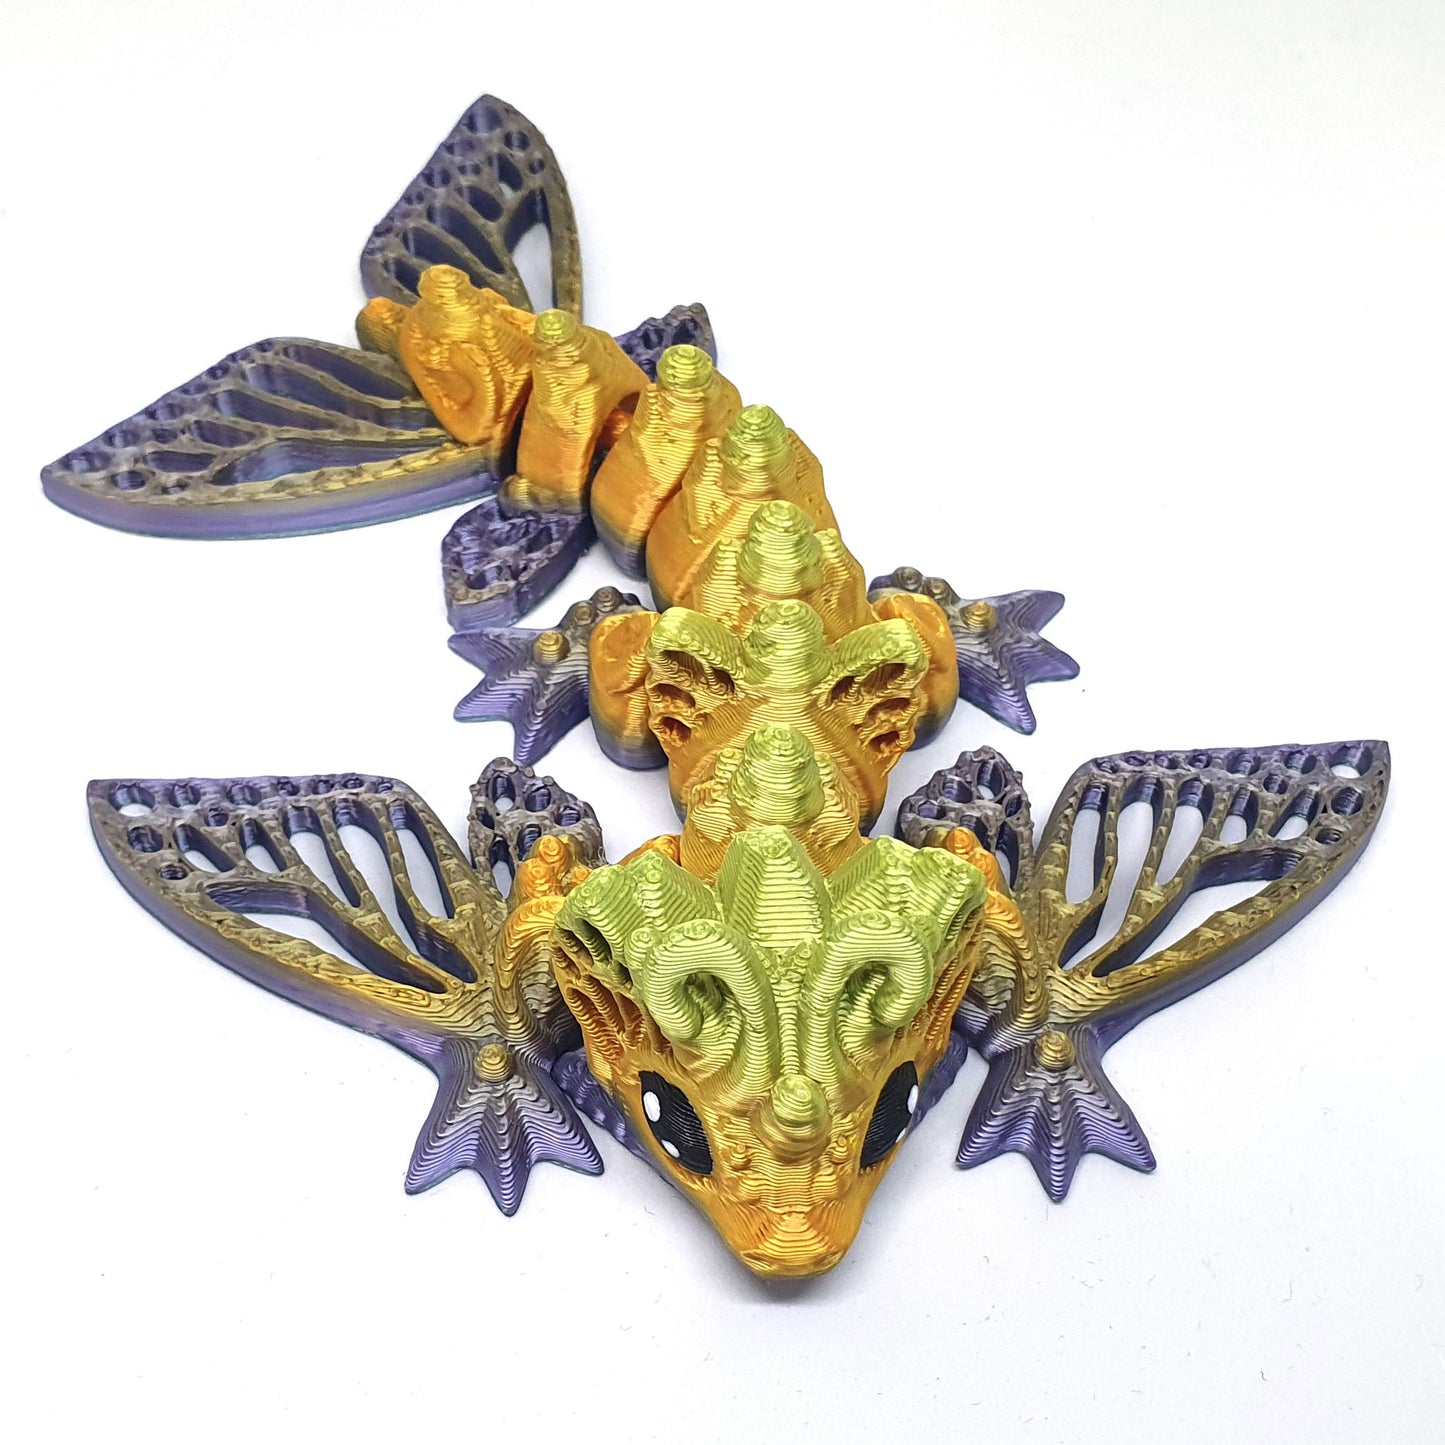 Butterfly Wyvern Articulated Baby Dragon